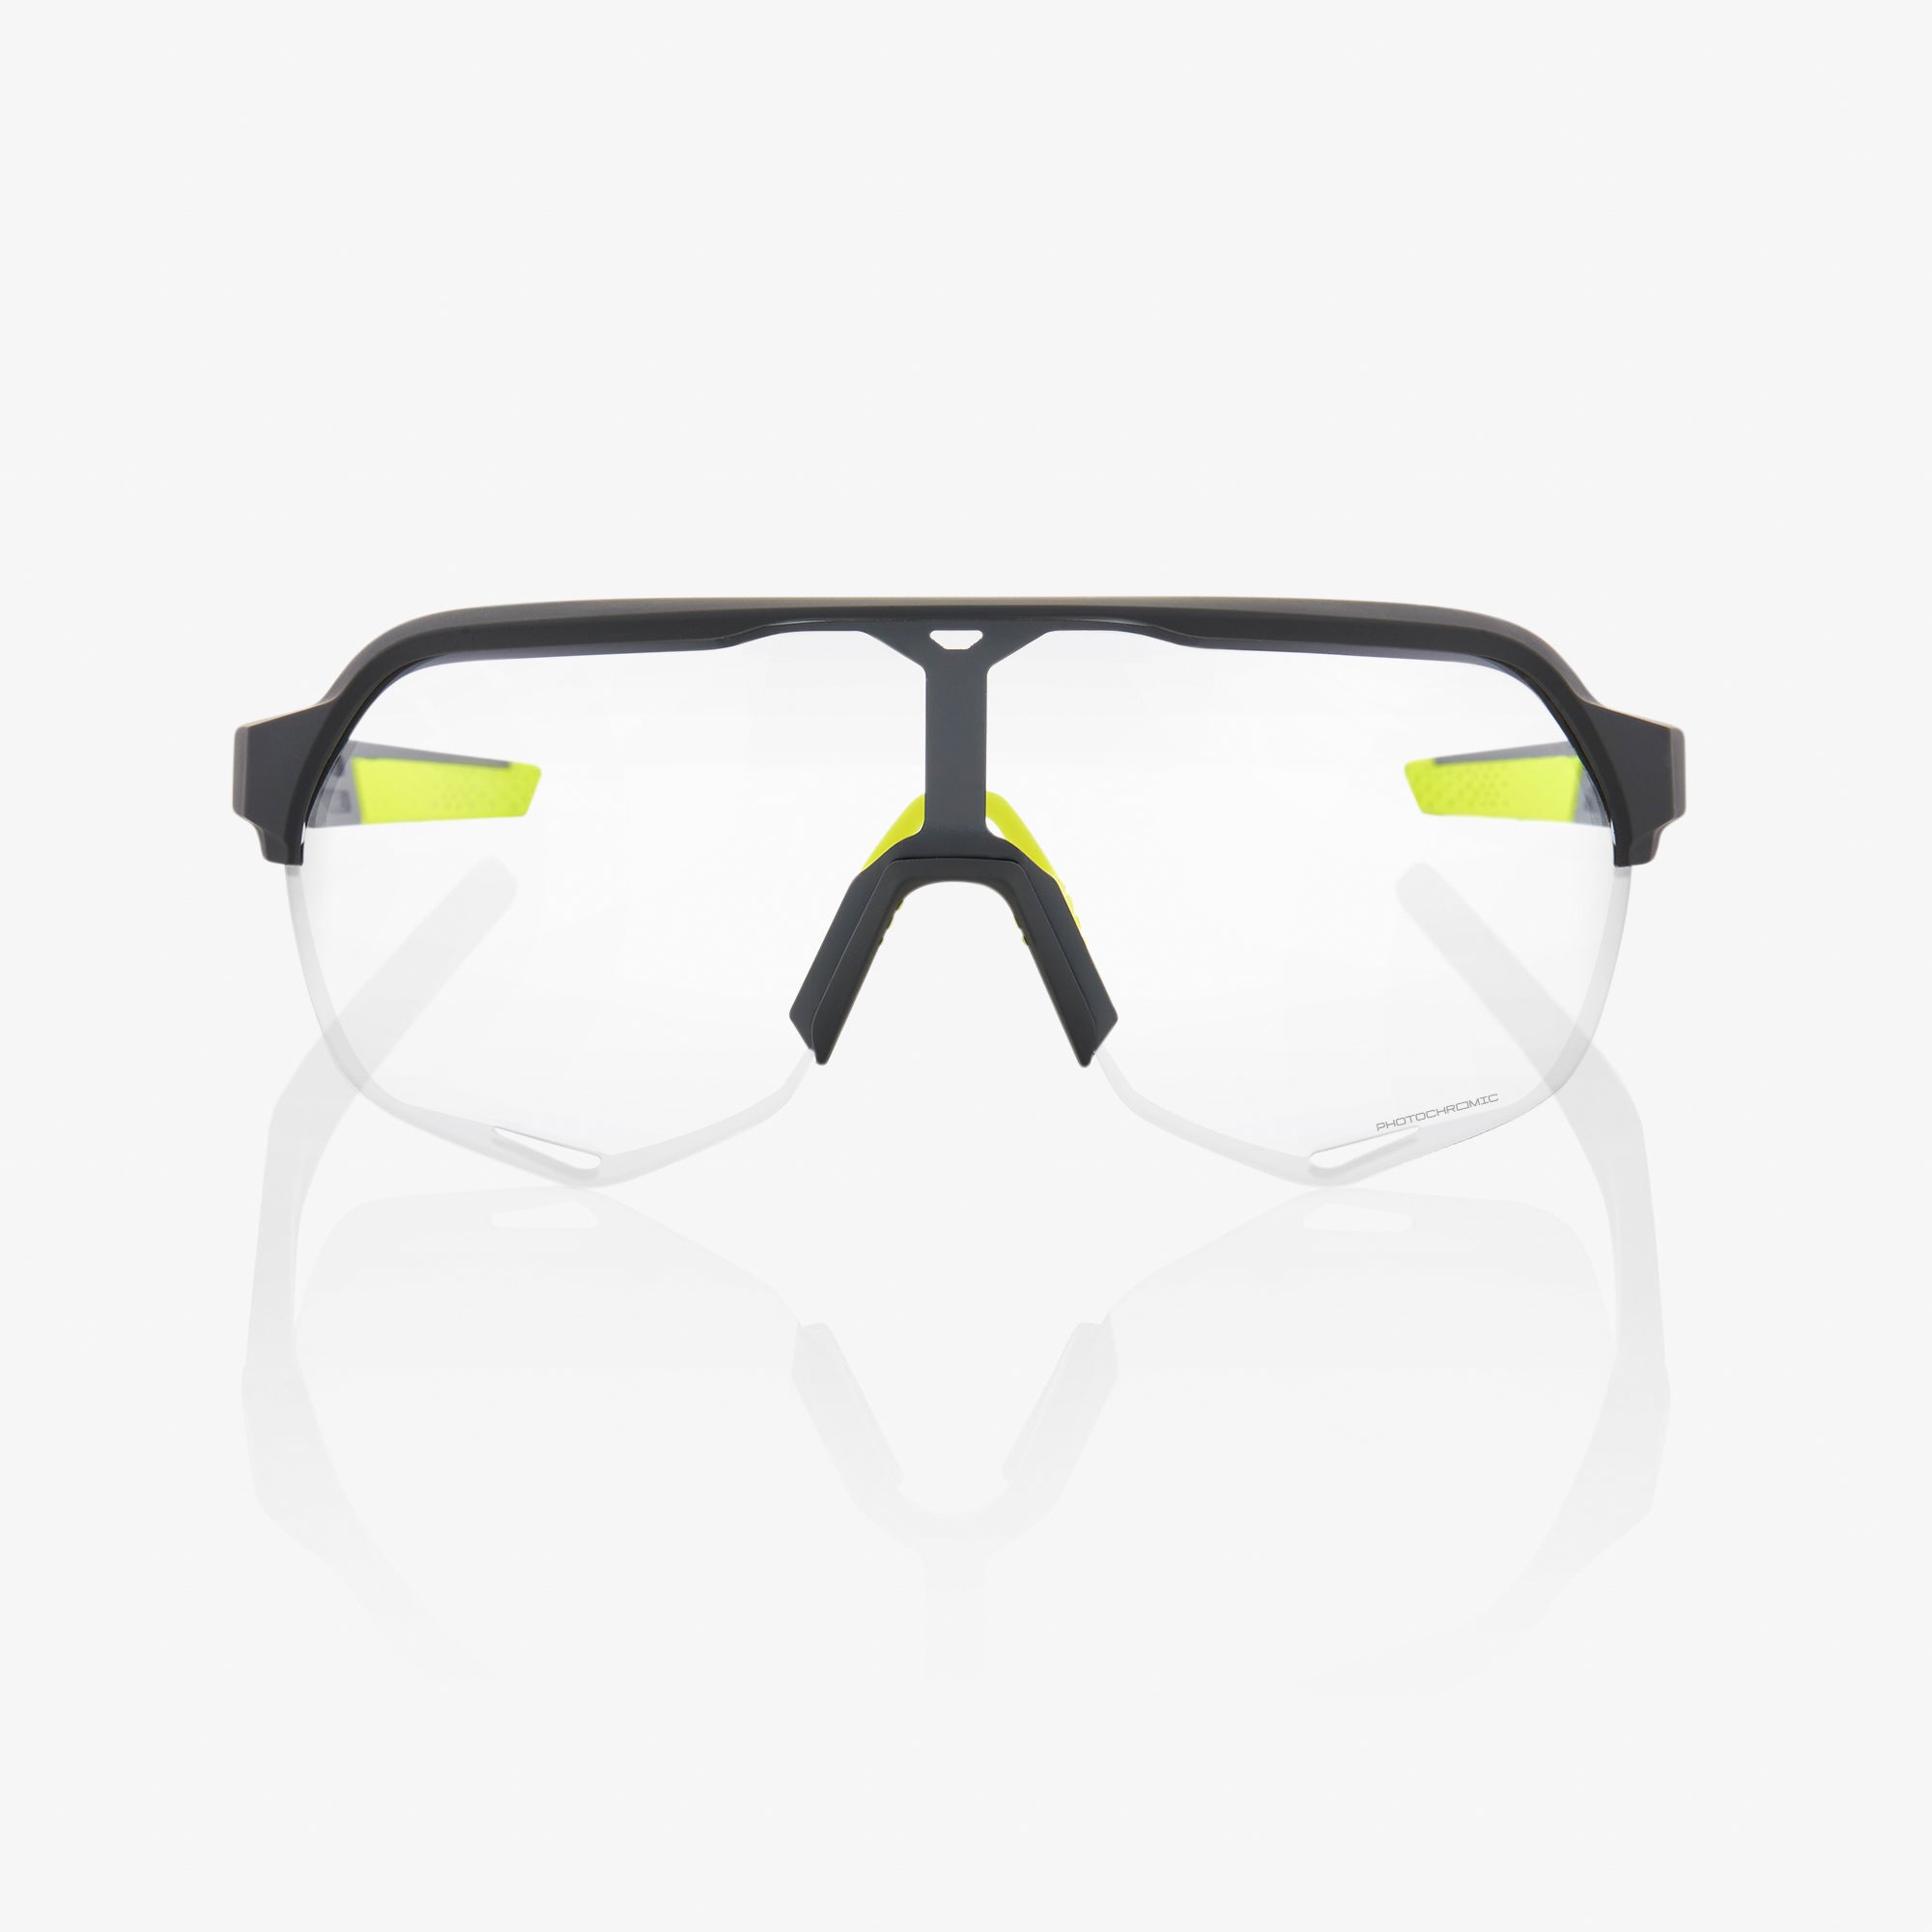 S2 - Soft Tact Cool Grey - Photochromic Lens - OS - Secondary